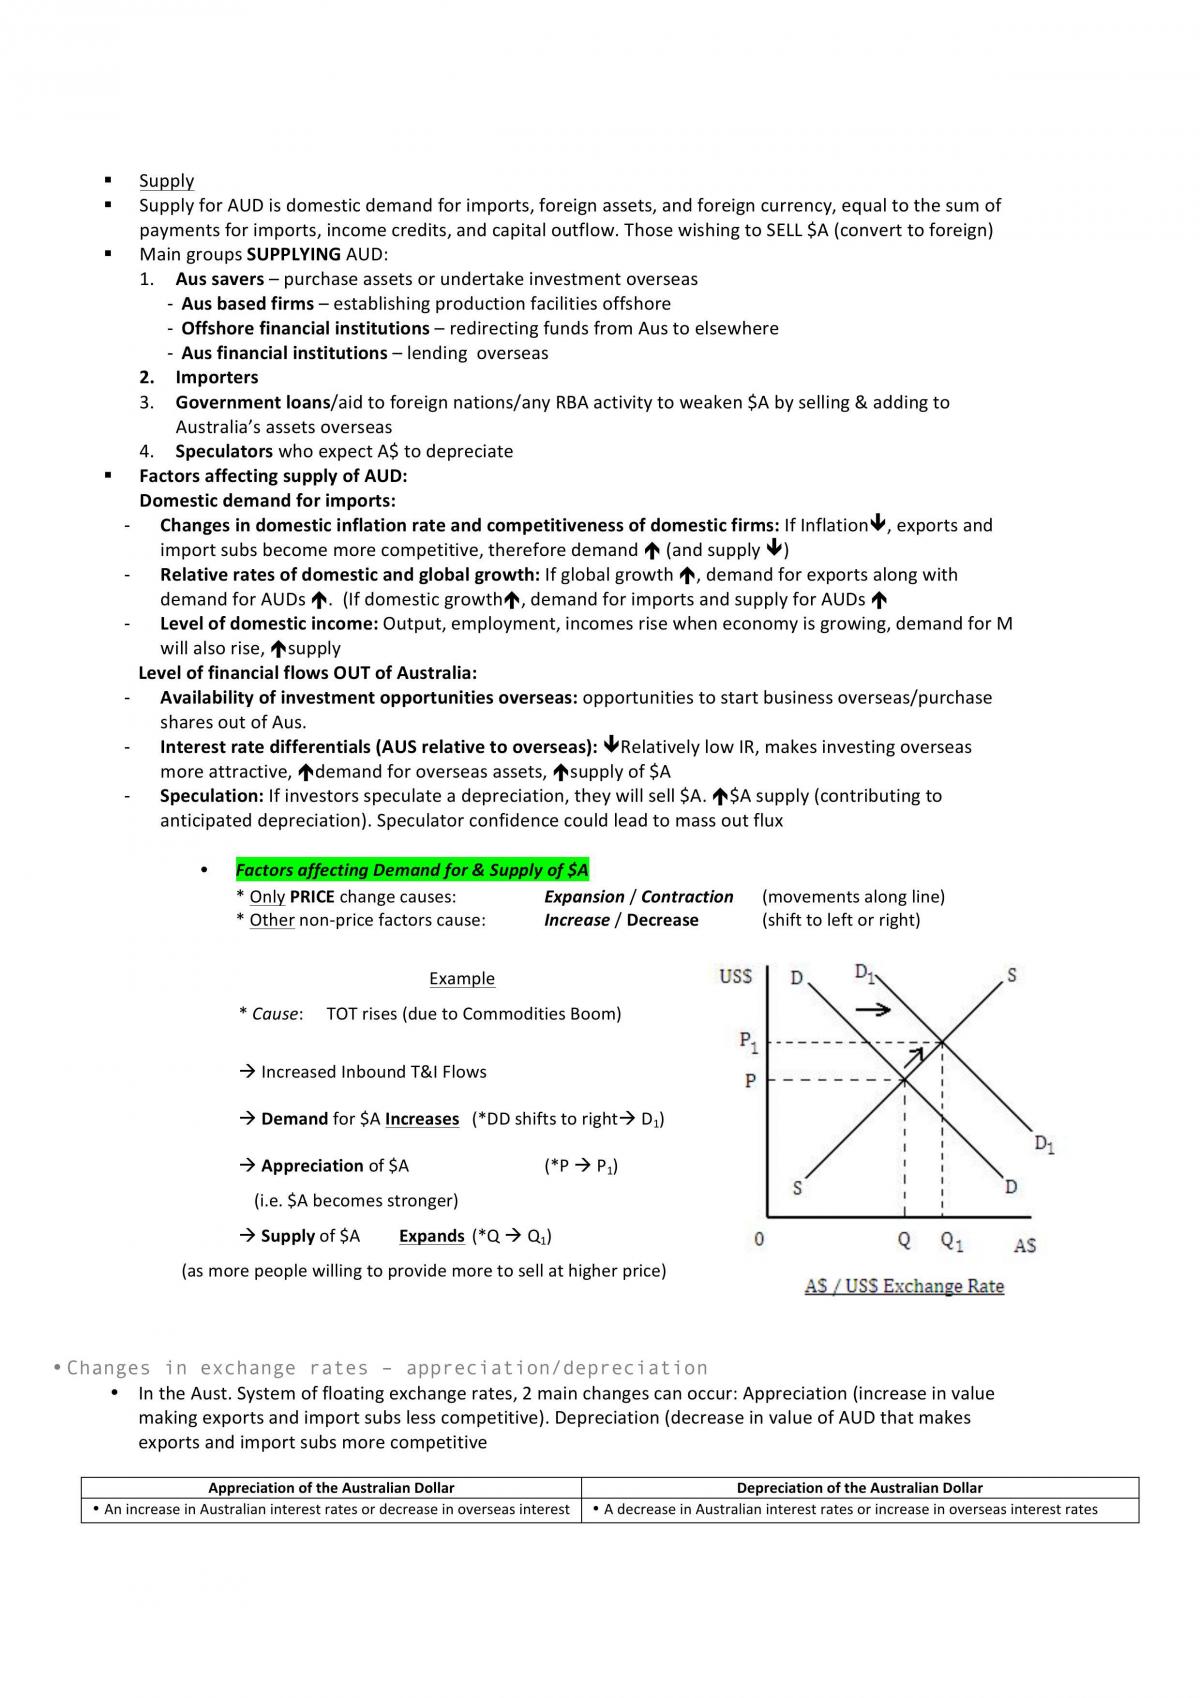 Economics HSC Topic 2 Full Notes - Page 13